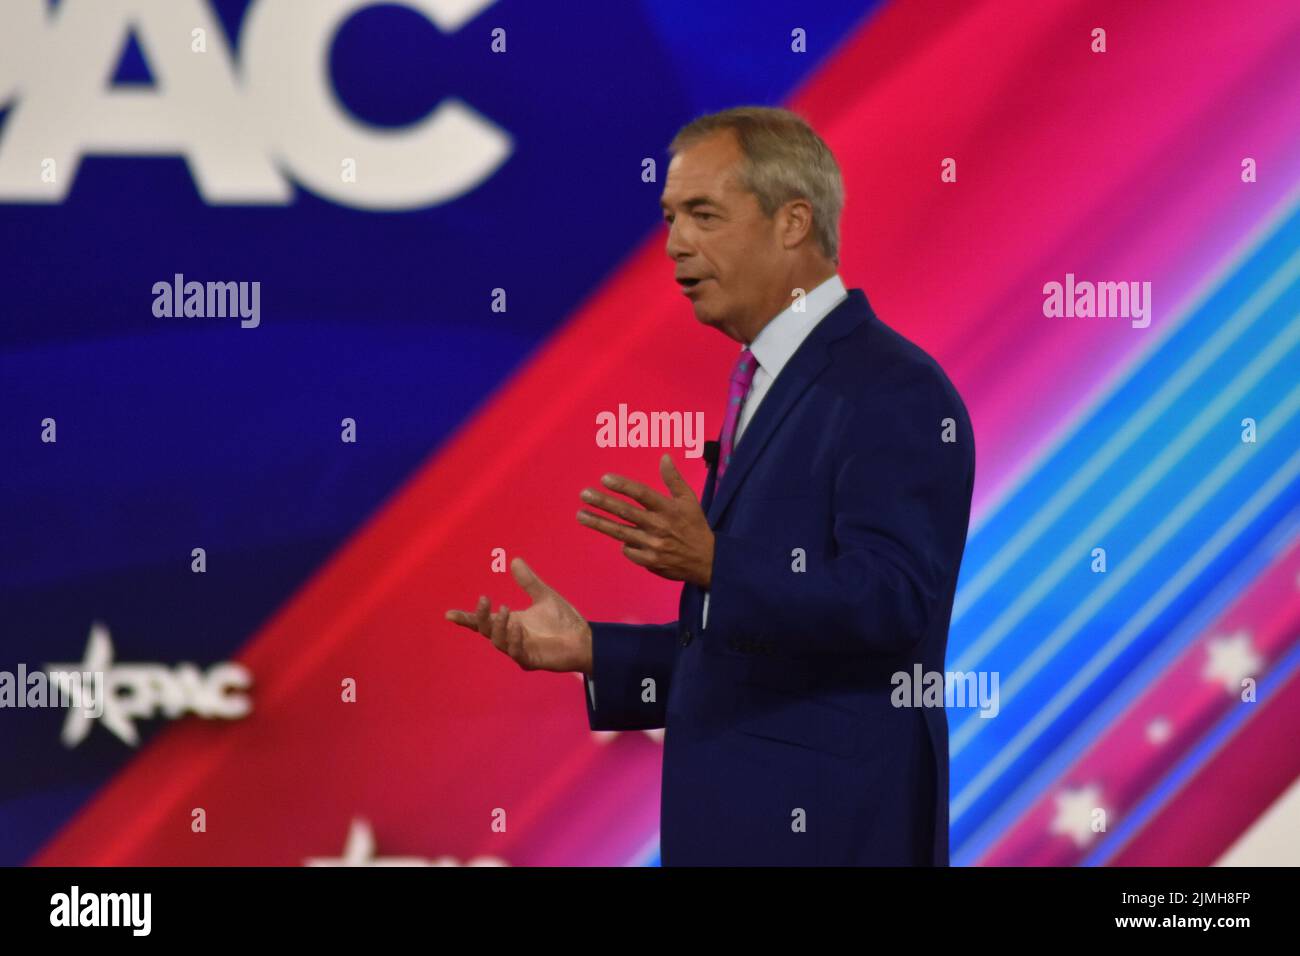 Dallas, TX, USA. 6th Aug, 2022. (NEW) Nigel Farage delivers remarks at the Conservative Political Action Conference 2022 in Dallas, Texas. August 6, 2022, Dallas, TX, USA. Nigel Farage delivers remarks during the Conservative Political Action Conference (CPAC), held in the state of Texas, in United States, on Saturday (6). Nigel Paul Farage is a British broadcaster and former politician who was Leader of the UK Independence Party from 2006 to 2009 and 2010 to 2016 and Leader of the Brexit Party from 2019 to 2021. Credit: ZUMA Press, Inc./Alamy Live News Credit: ZUMA Press, Inc./Alamy Live News Stock Photo